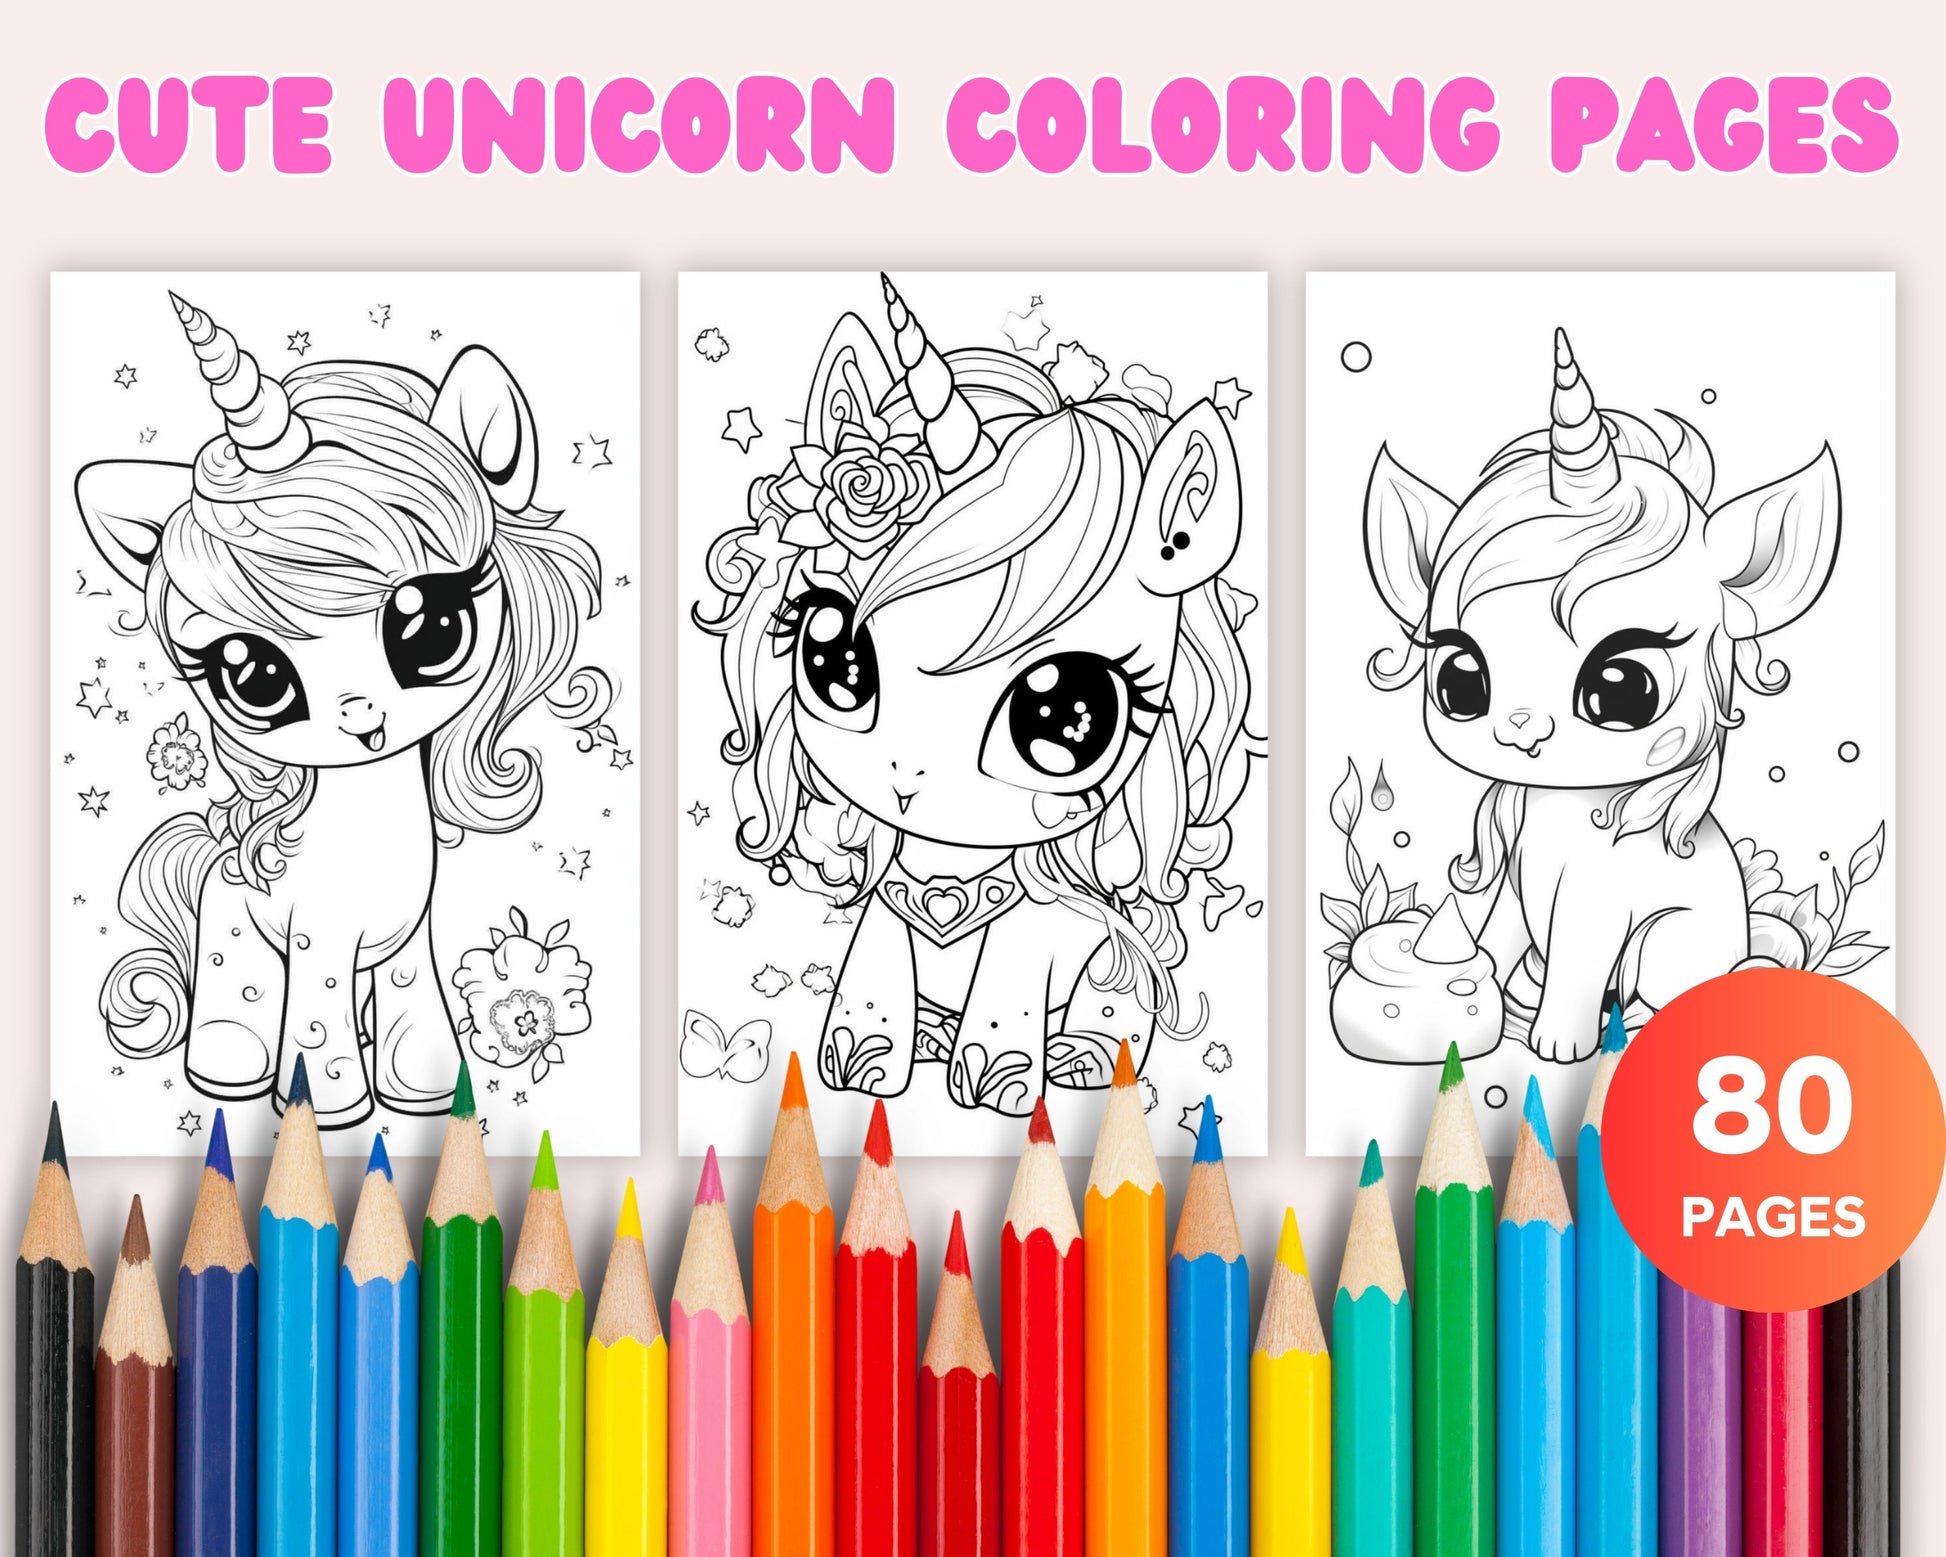 Cute unicorn printable coloring pages for kids printable pdf file â coloring